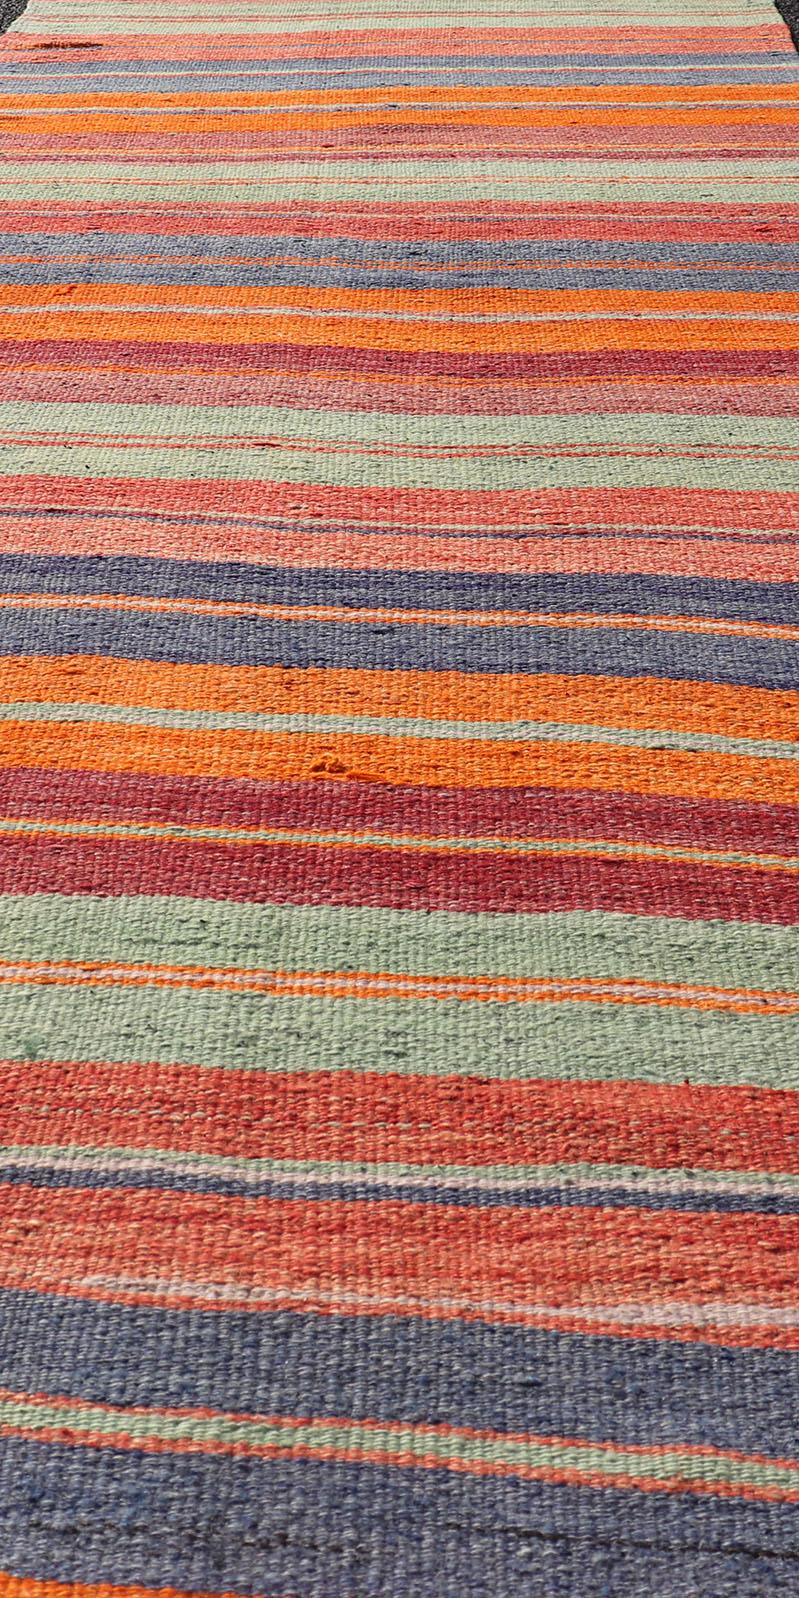 Vintage Turkish Kilim Runner with Horizontal Stripes in Beautiful Colors In Excellent Condition For Sale In Atlanta, GA